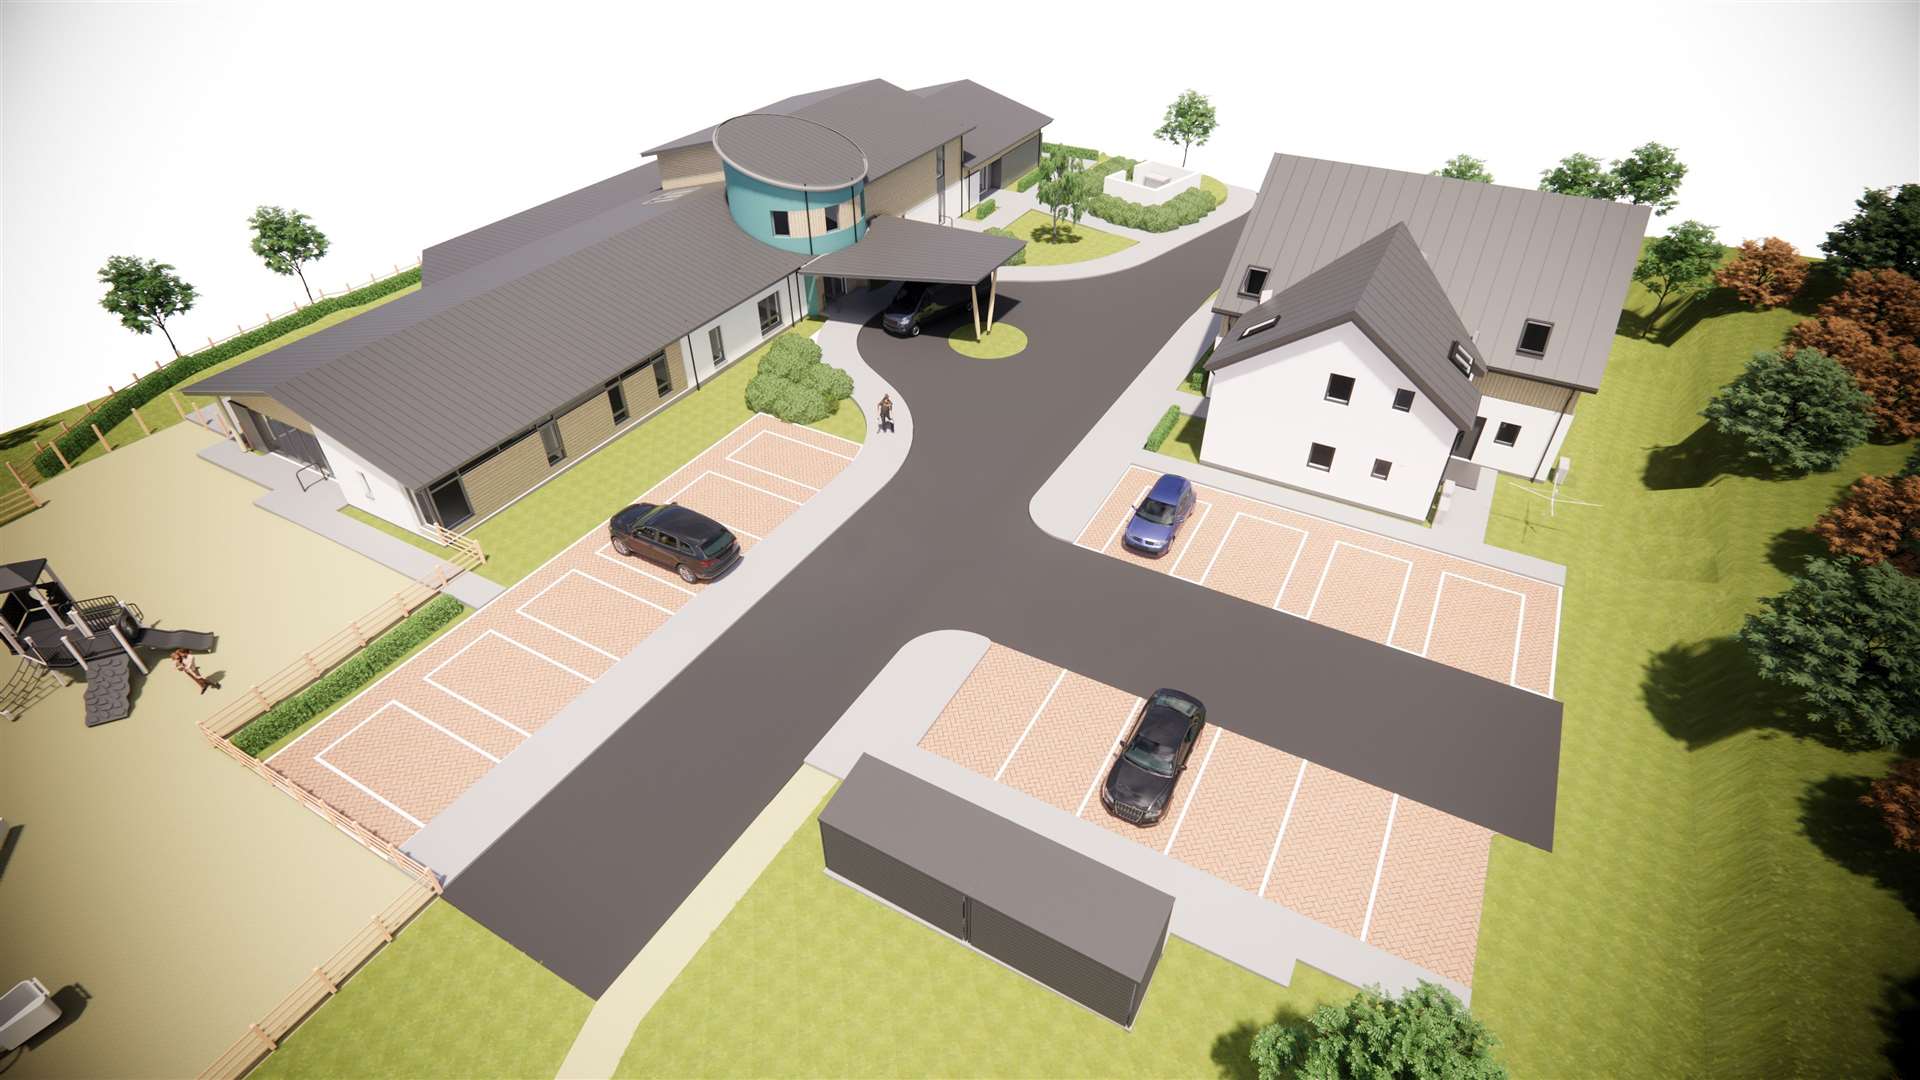 An illustration of what the Haven Centre will look like.